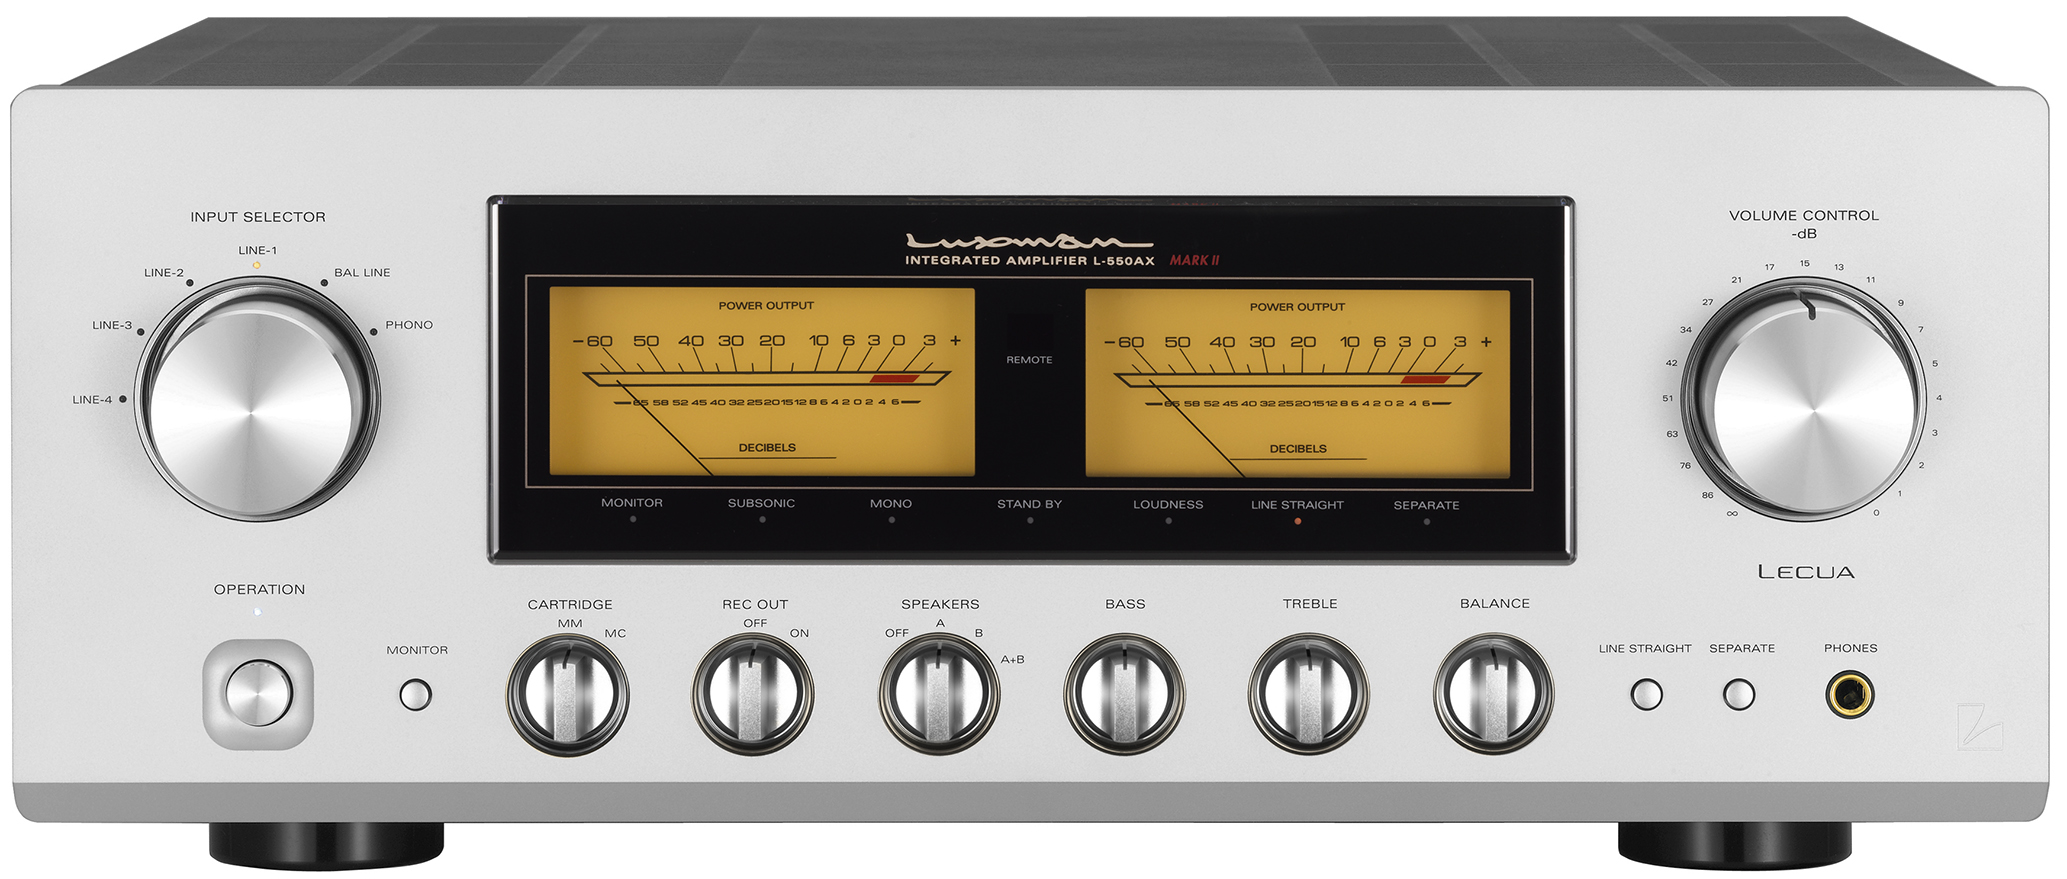 L-550AXII | INTEGRATED AMPLIFIERS | PRODUCTS | LUXMAN | Seeking